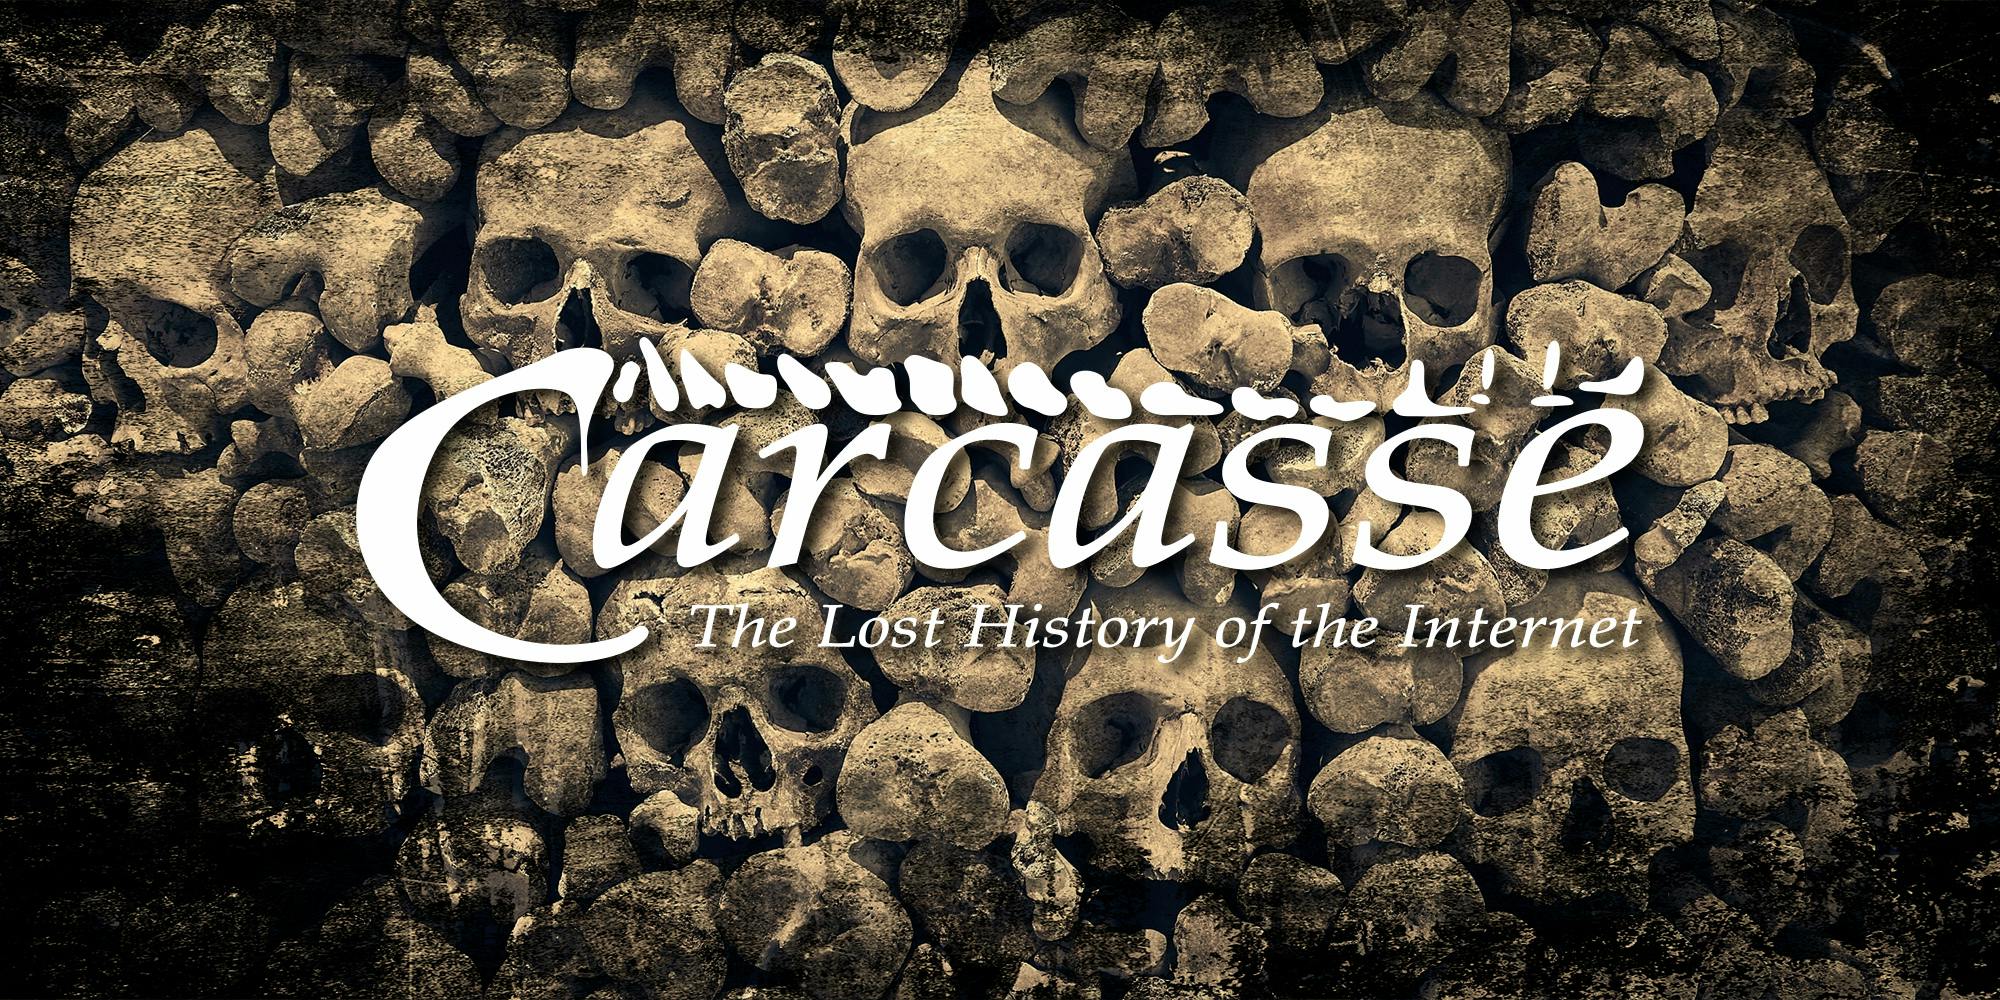 Wall of human skulls and bones with "Carcasse - The Lost History of the Internet"